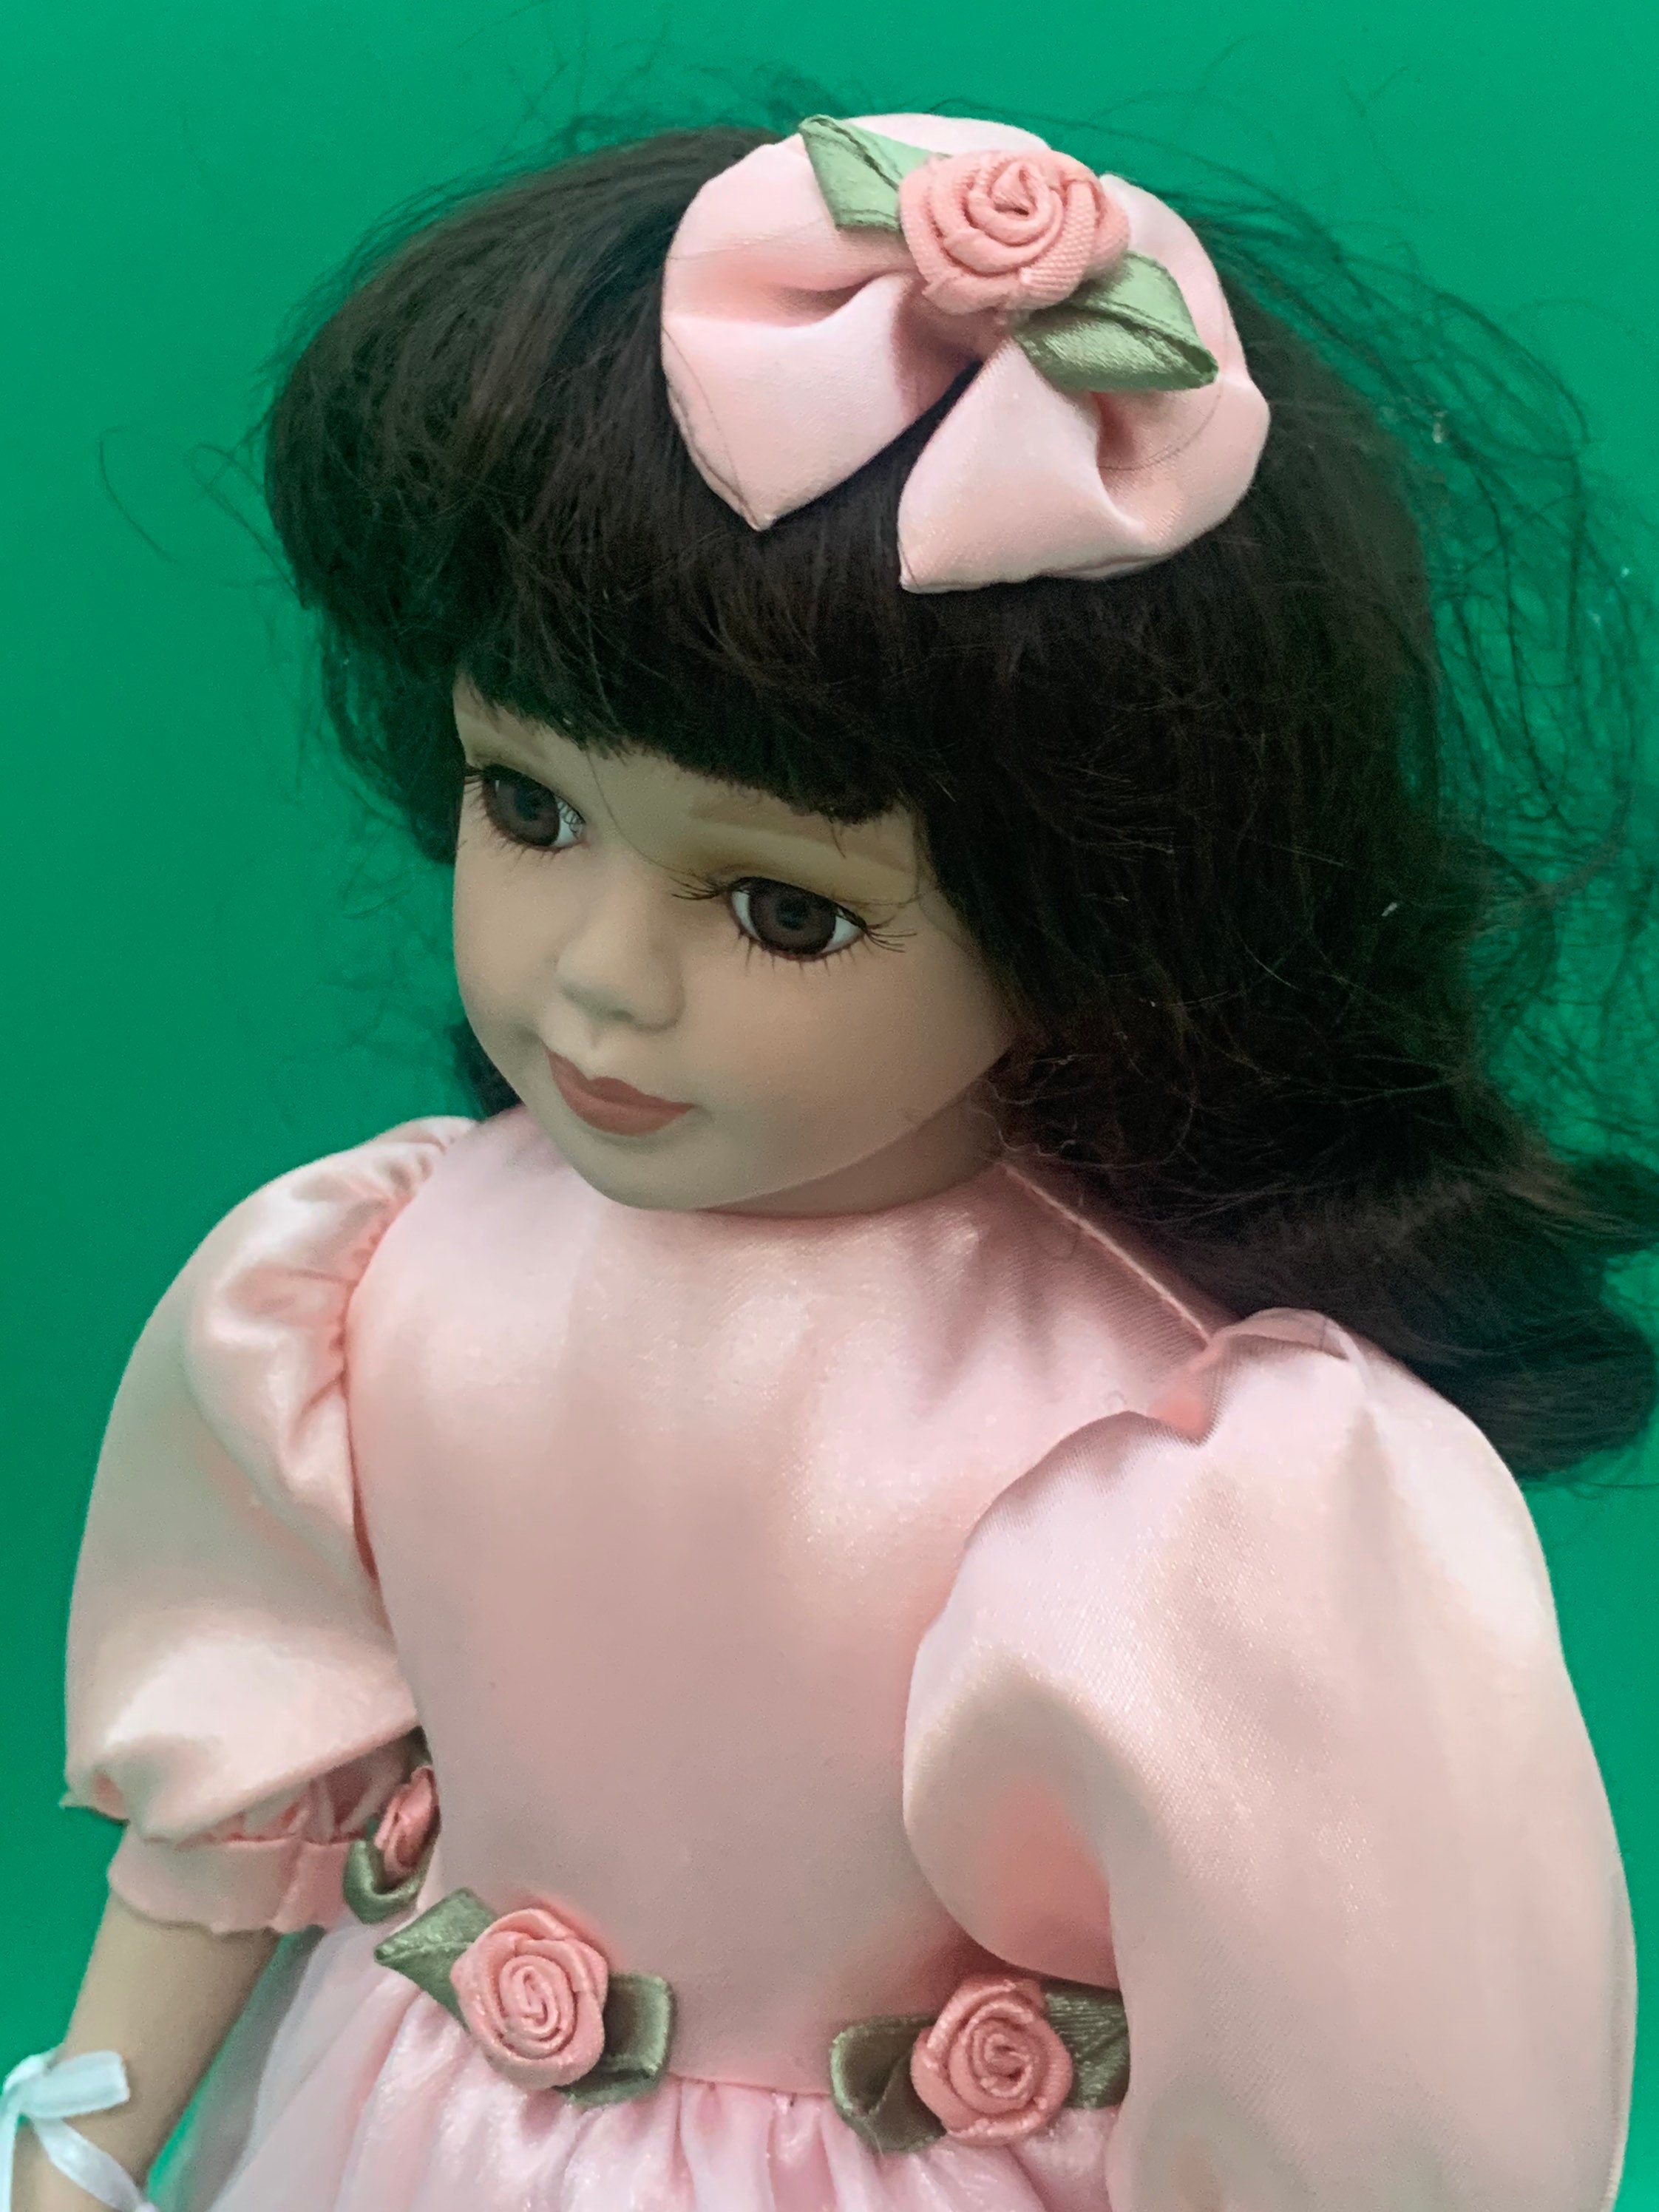 Velvet ribbon: Classic Doll Modes is your source for doll-making needs